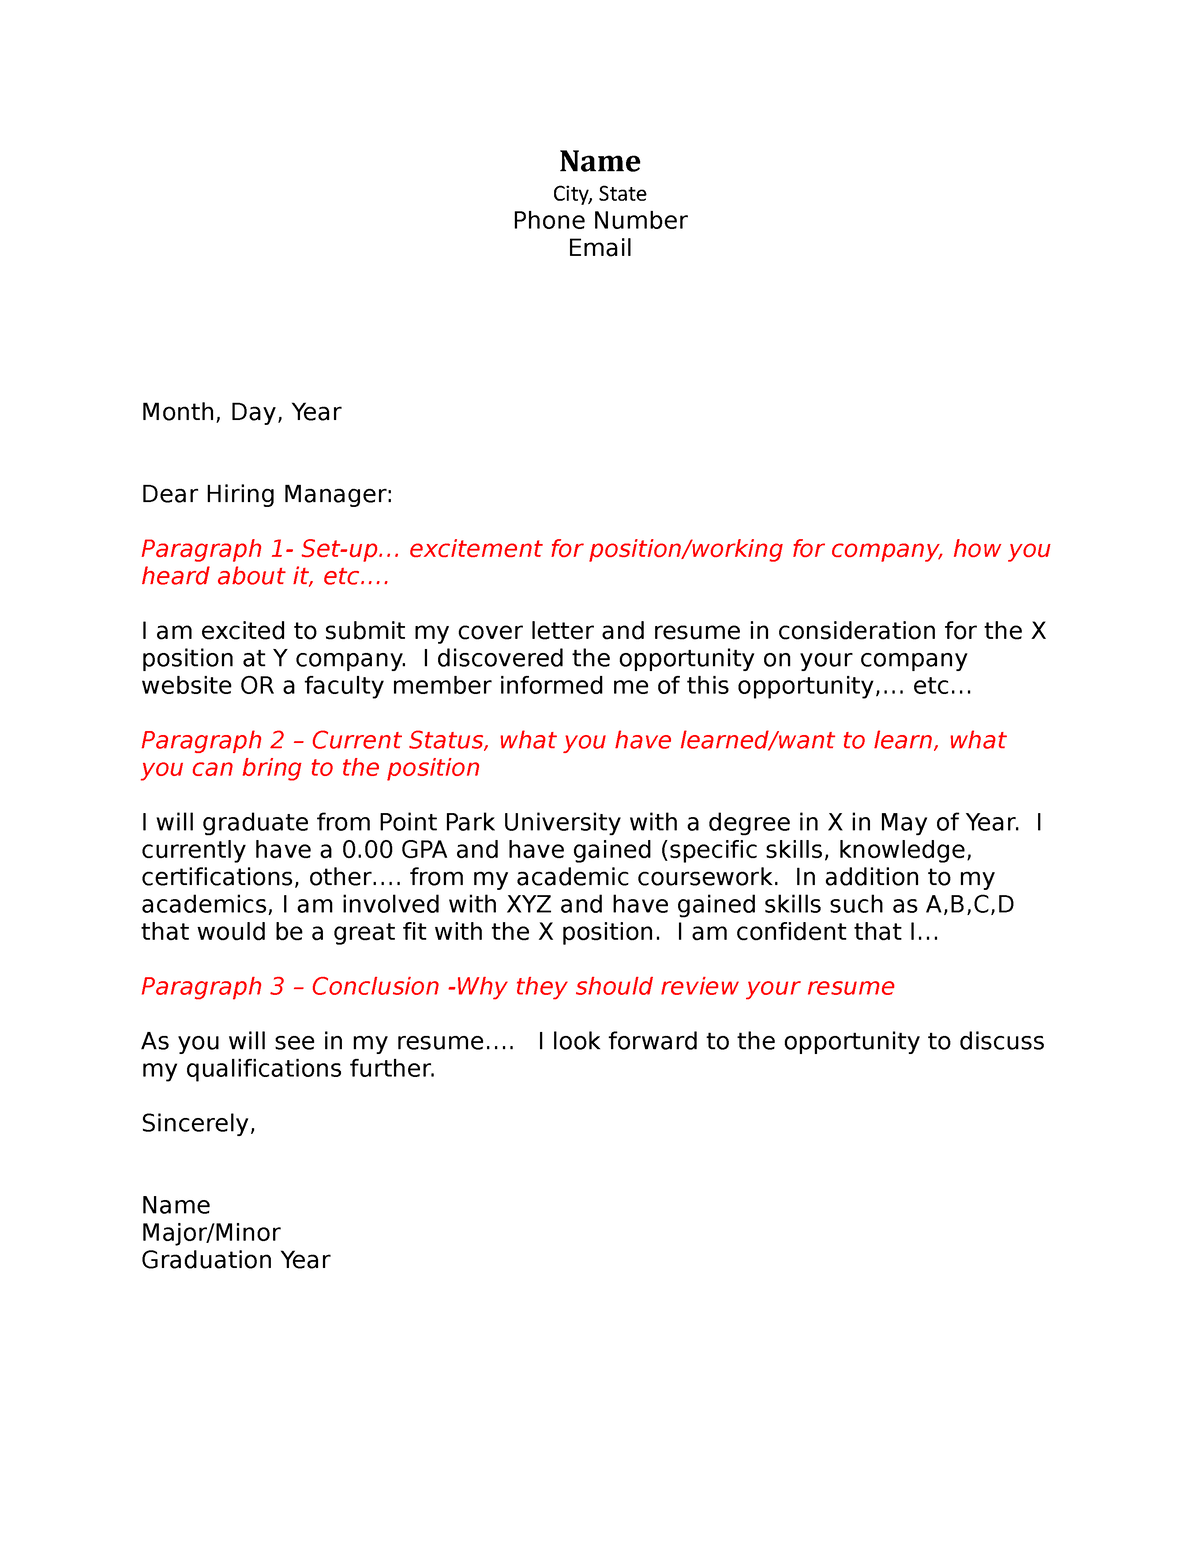 Cover Letter Example (Editable) - Name City, State Phone Number Email ...